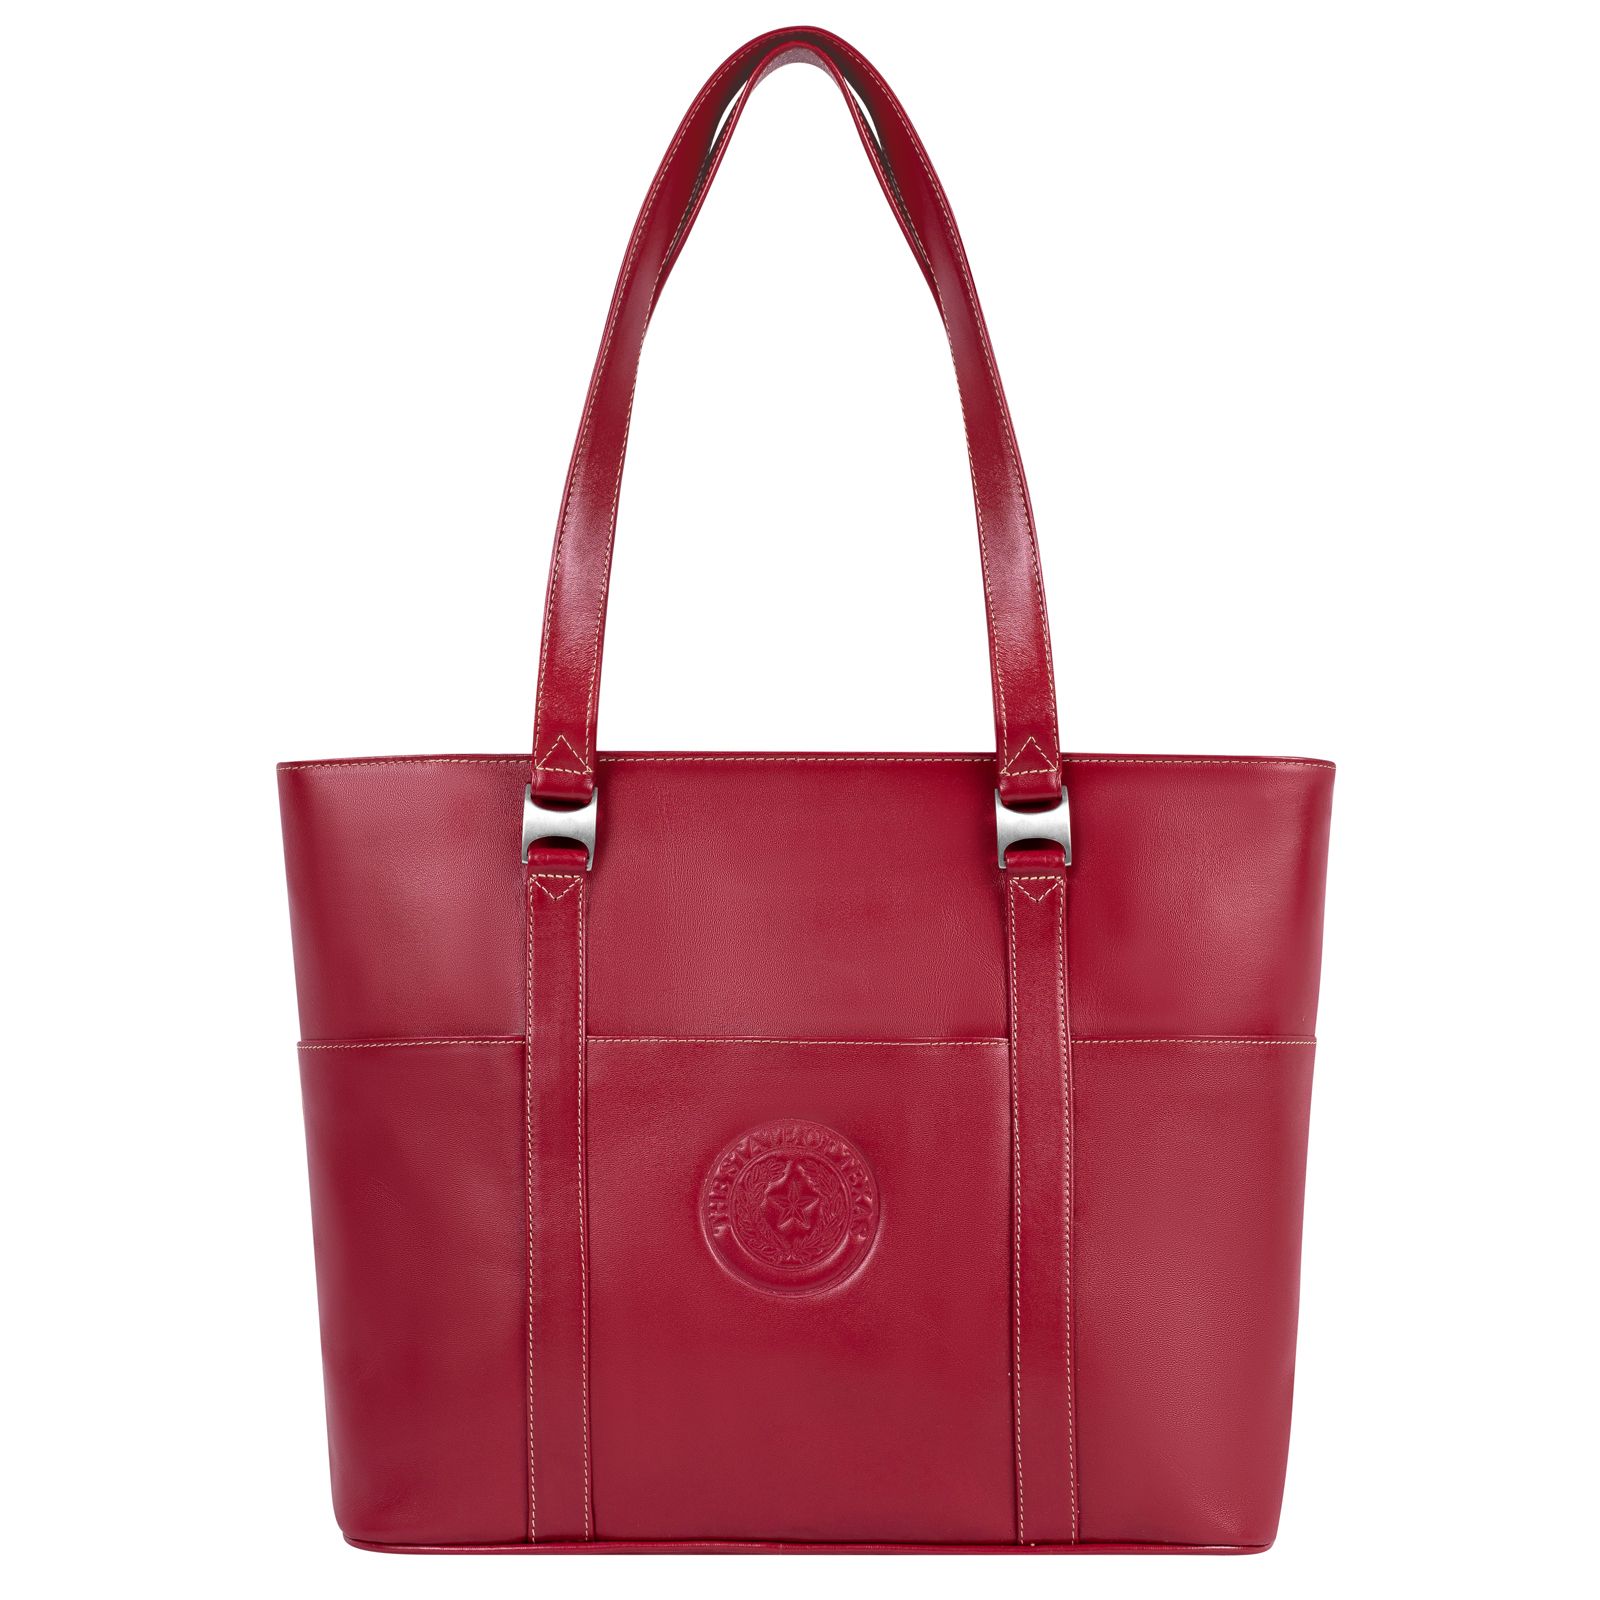 Red Leather Computer Tote Bag | Texas Capitol Gift Shop